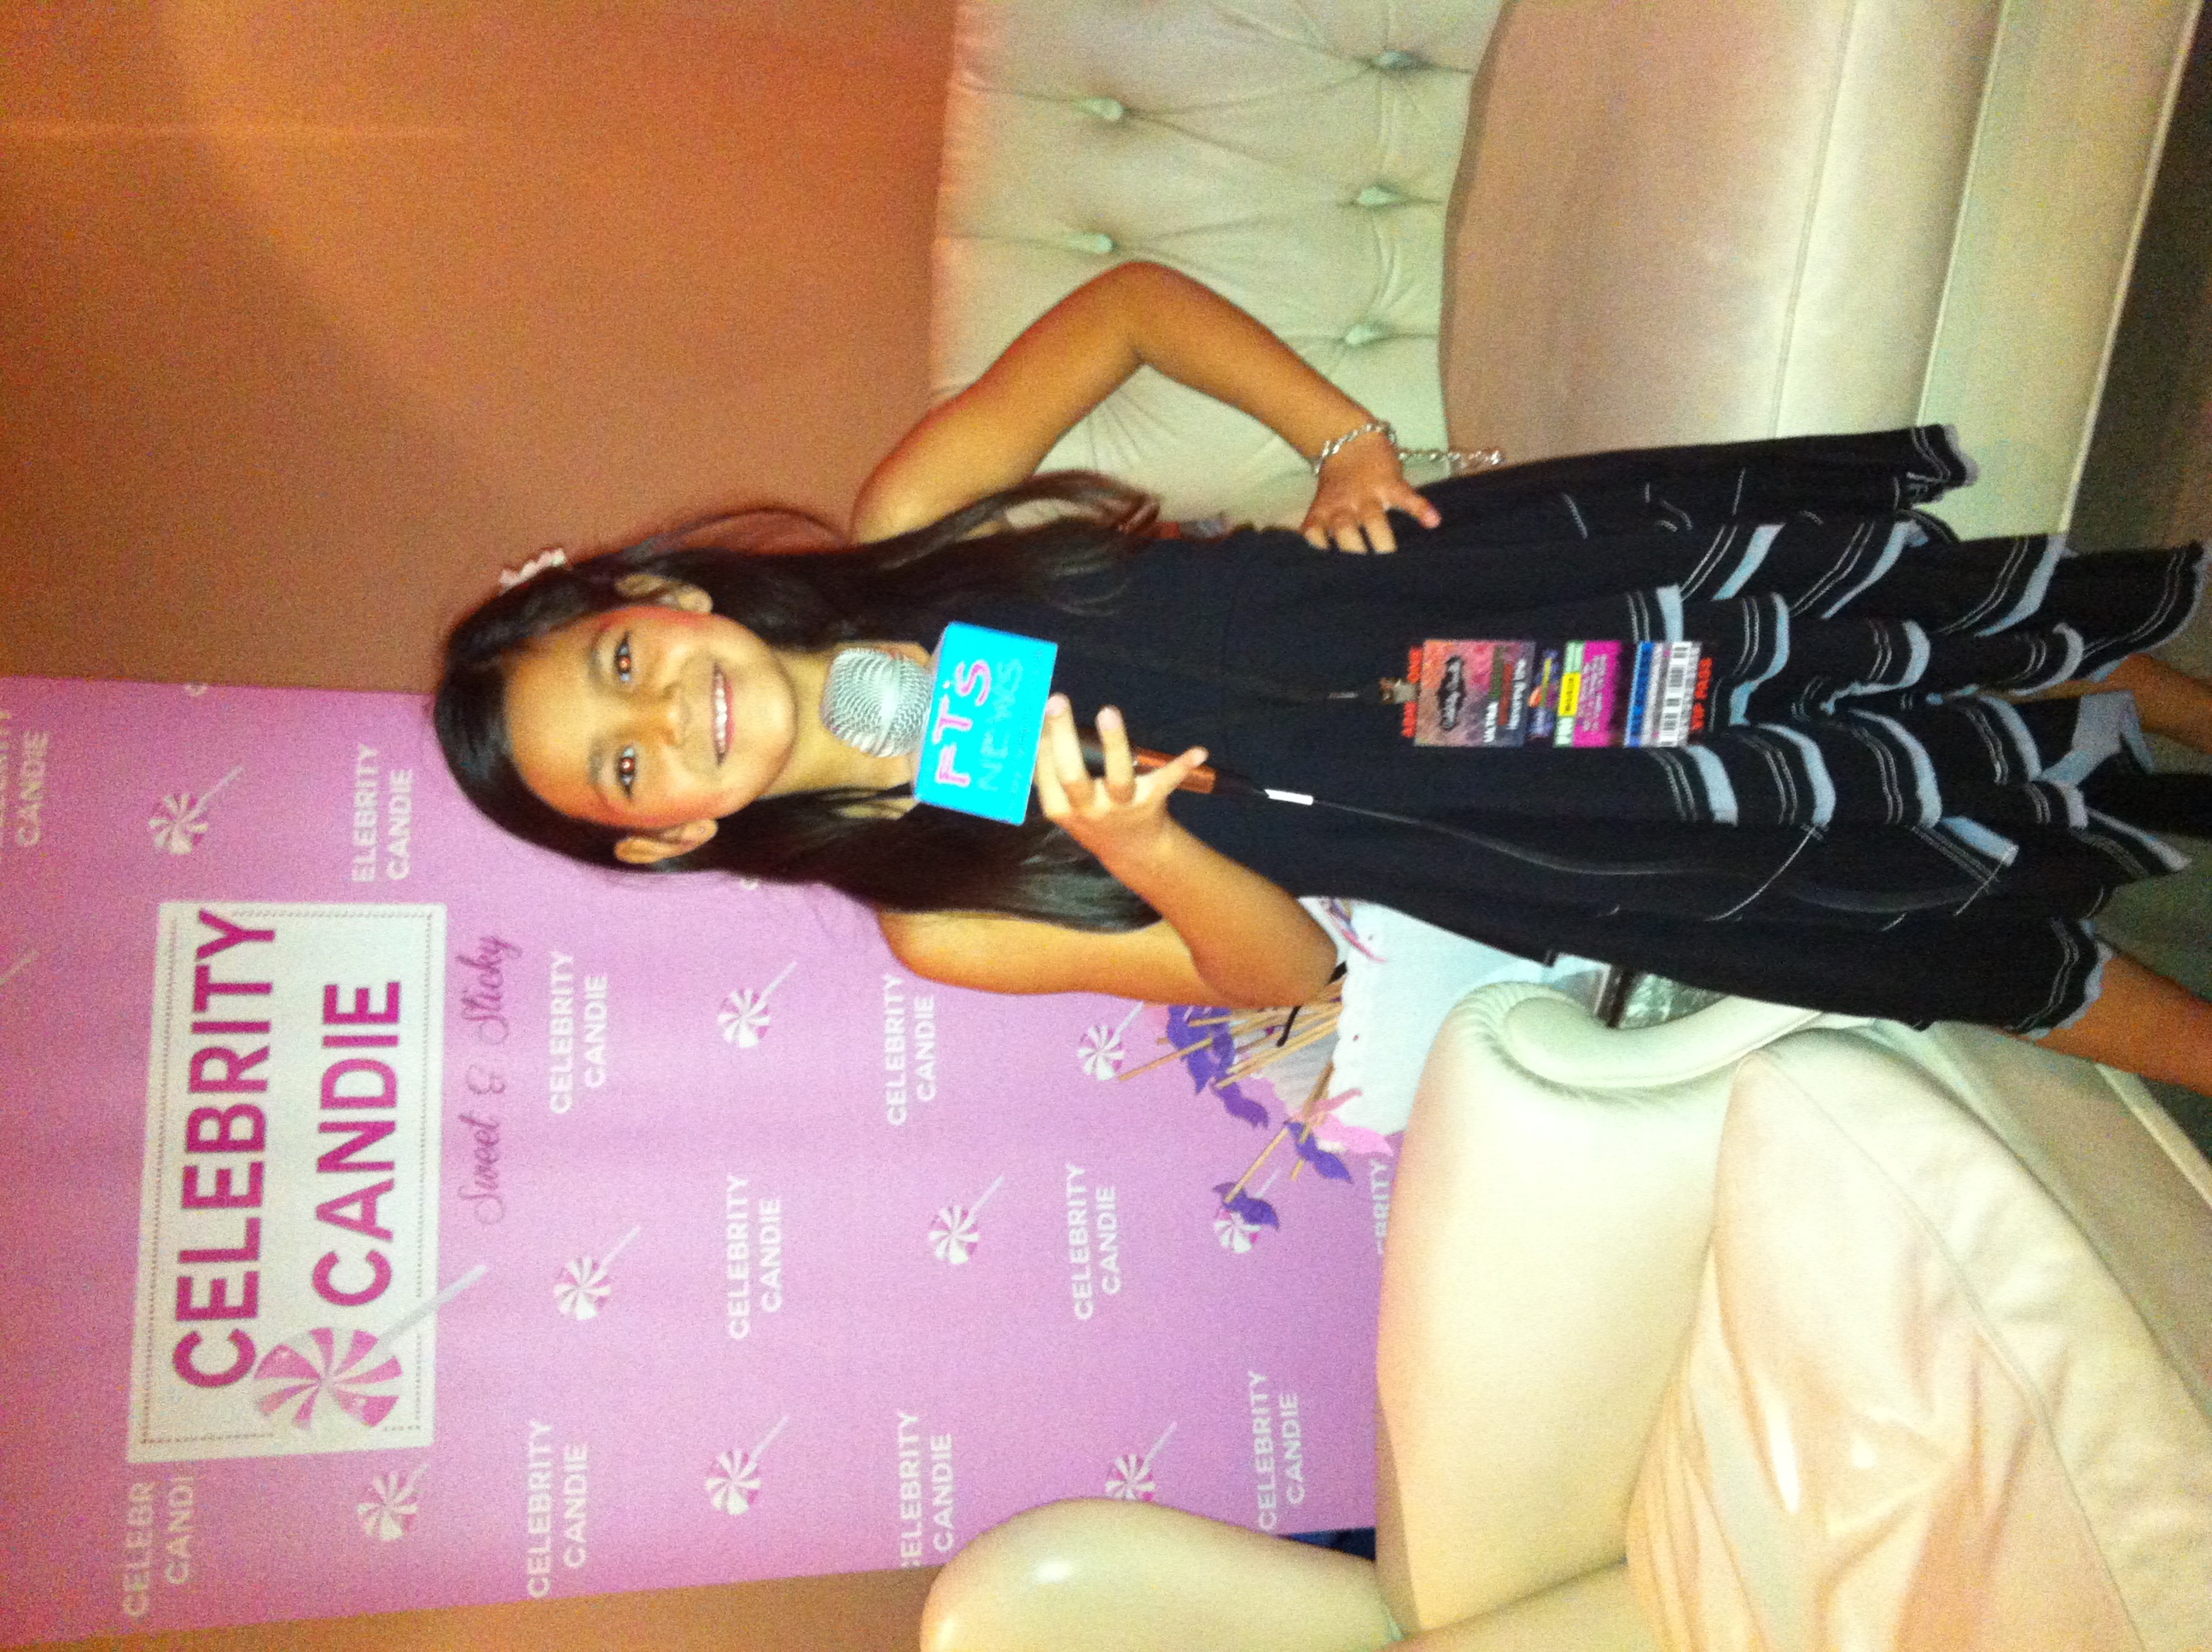 Bella Stine reporting at the gifting suite for the 2014 Kids Choice Awards for FTS Kids News.